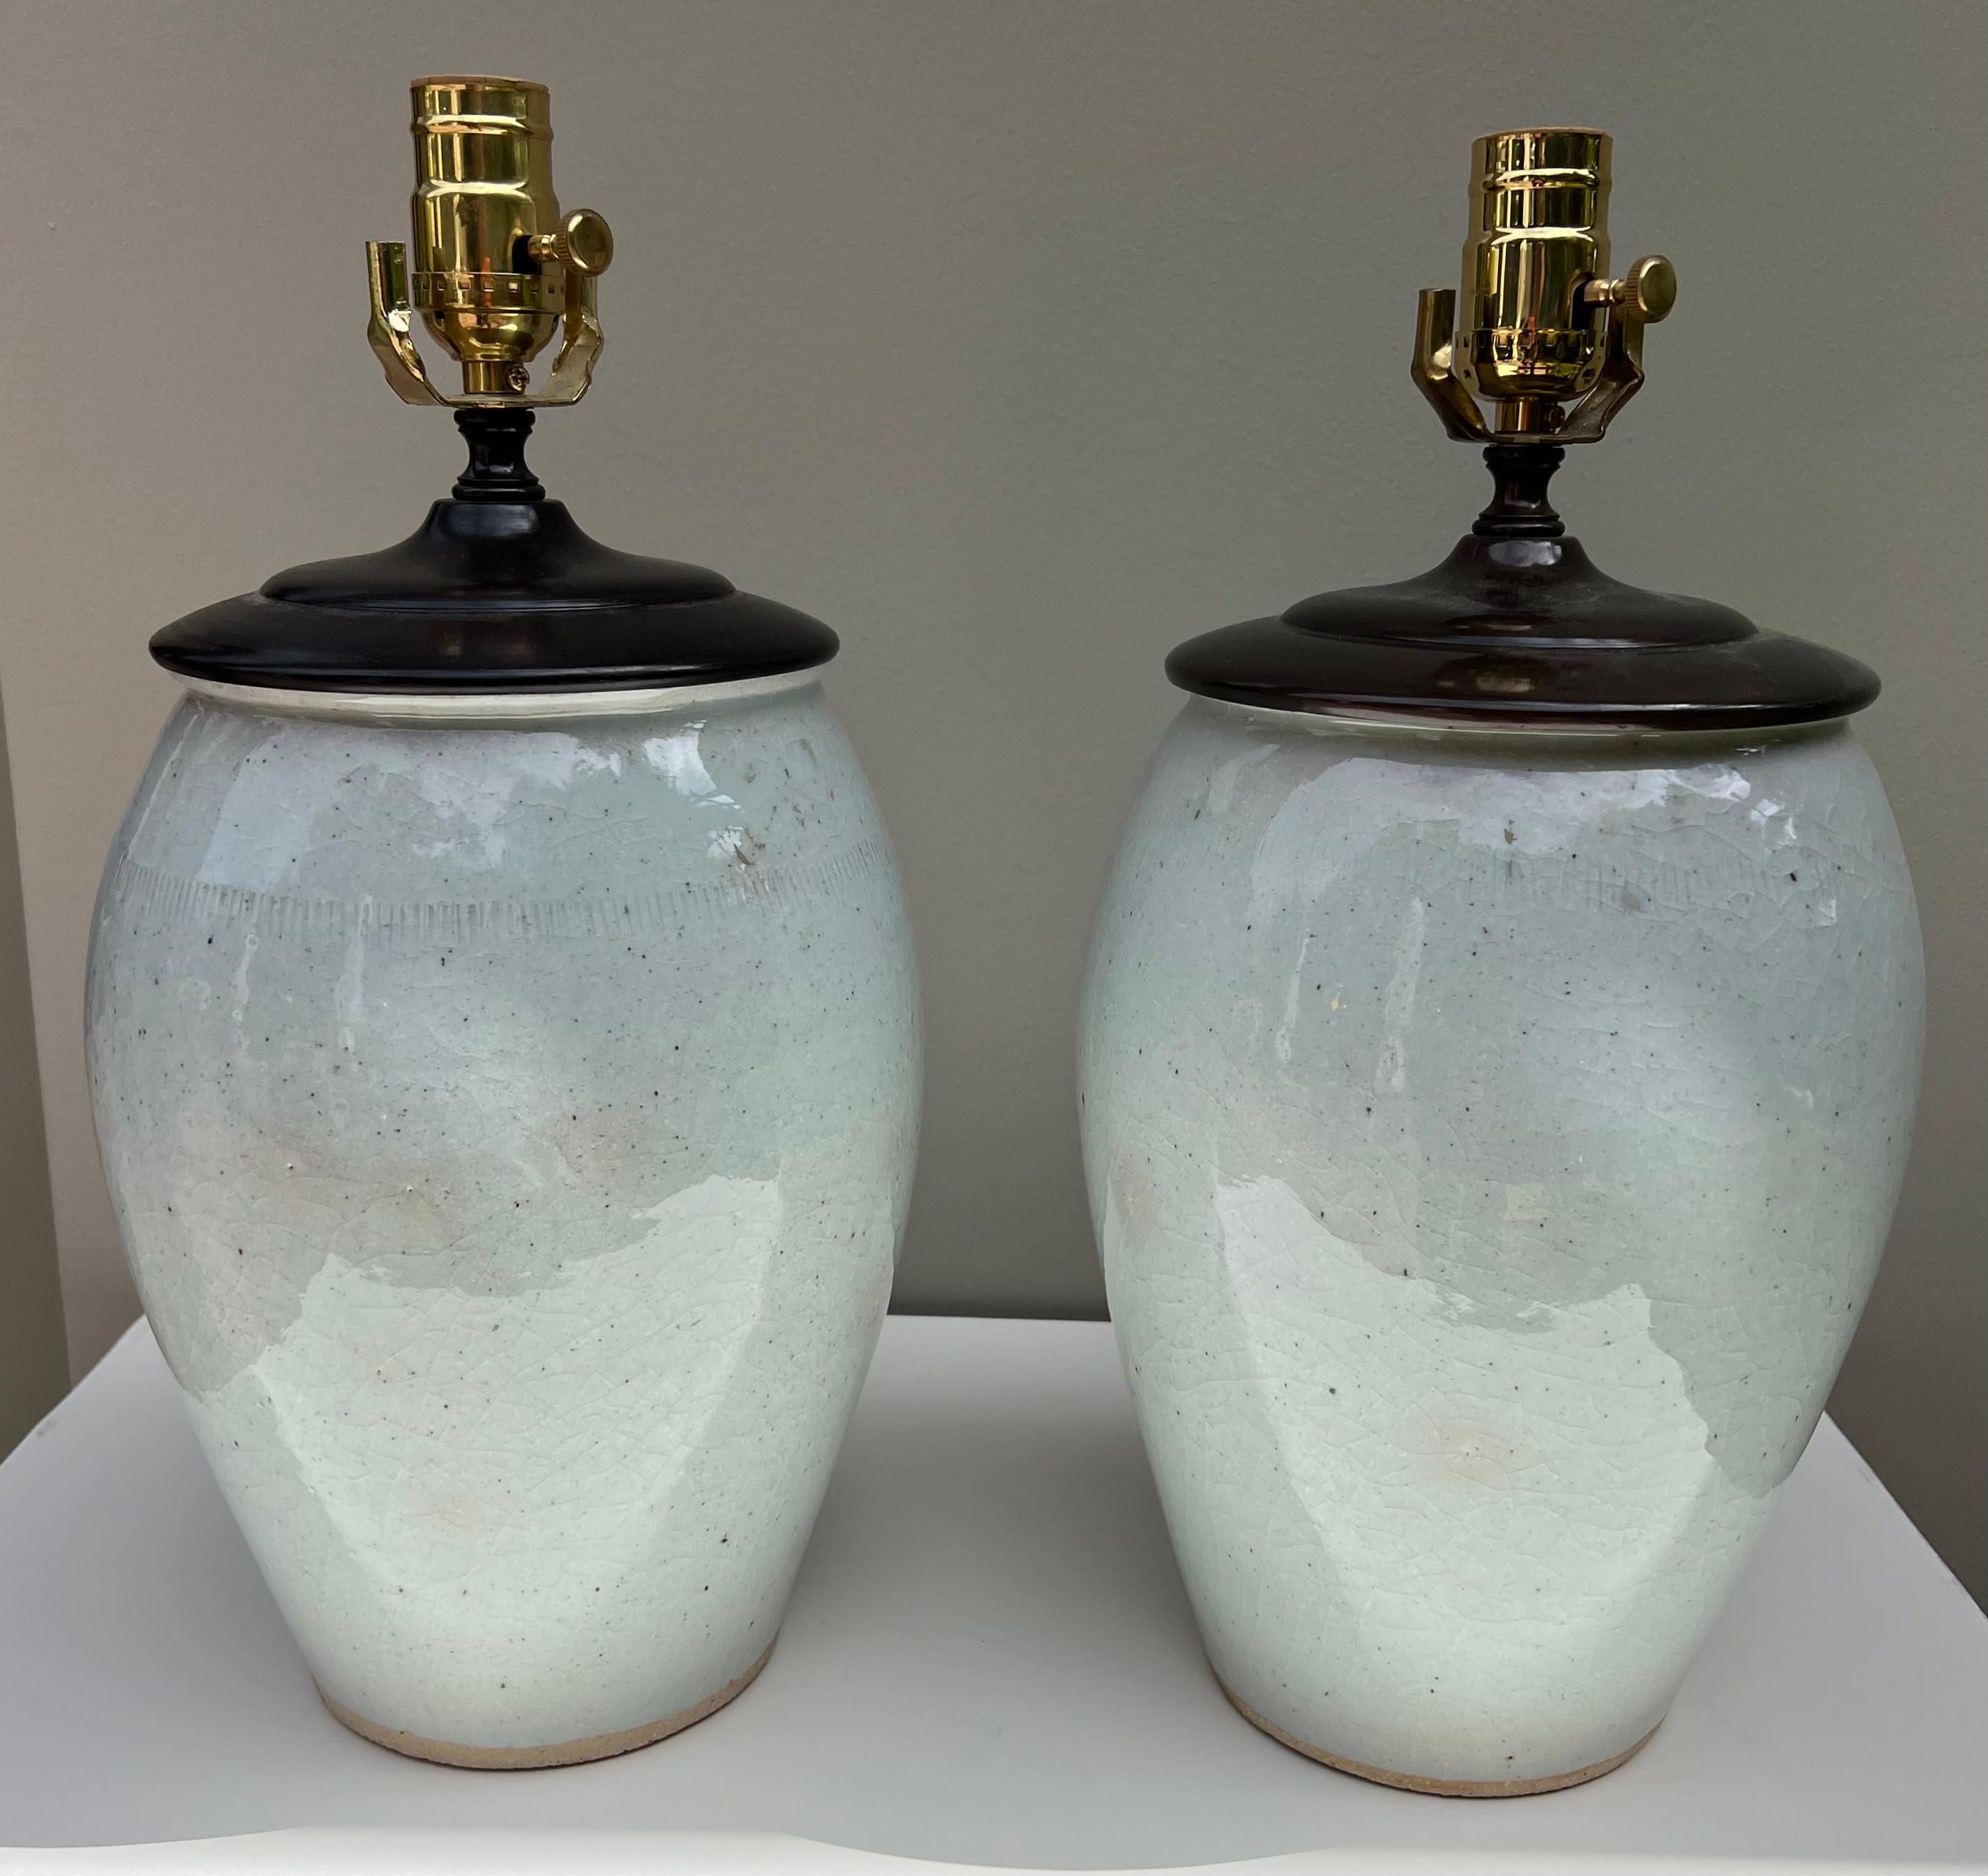 This pair of glazed ceramic lamps is transitional and are easily placed in a multitude of interior settings.
The lamps are newly wired.